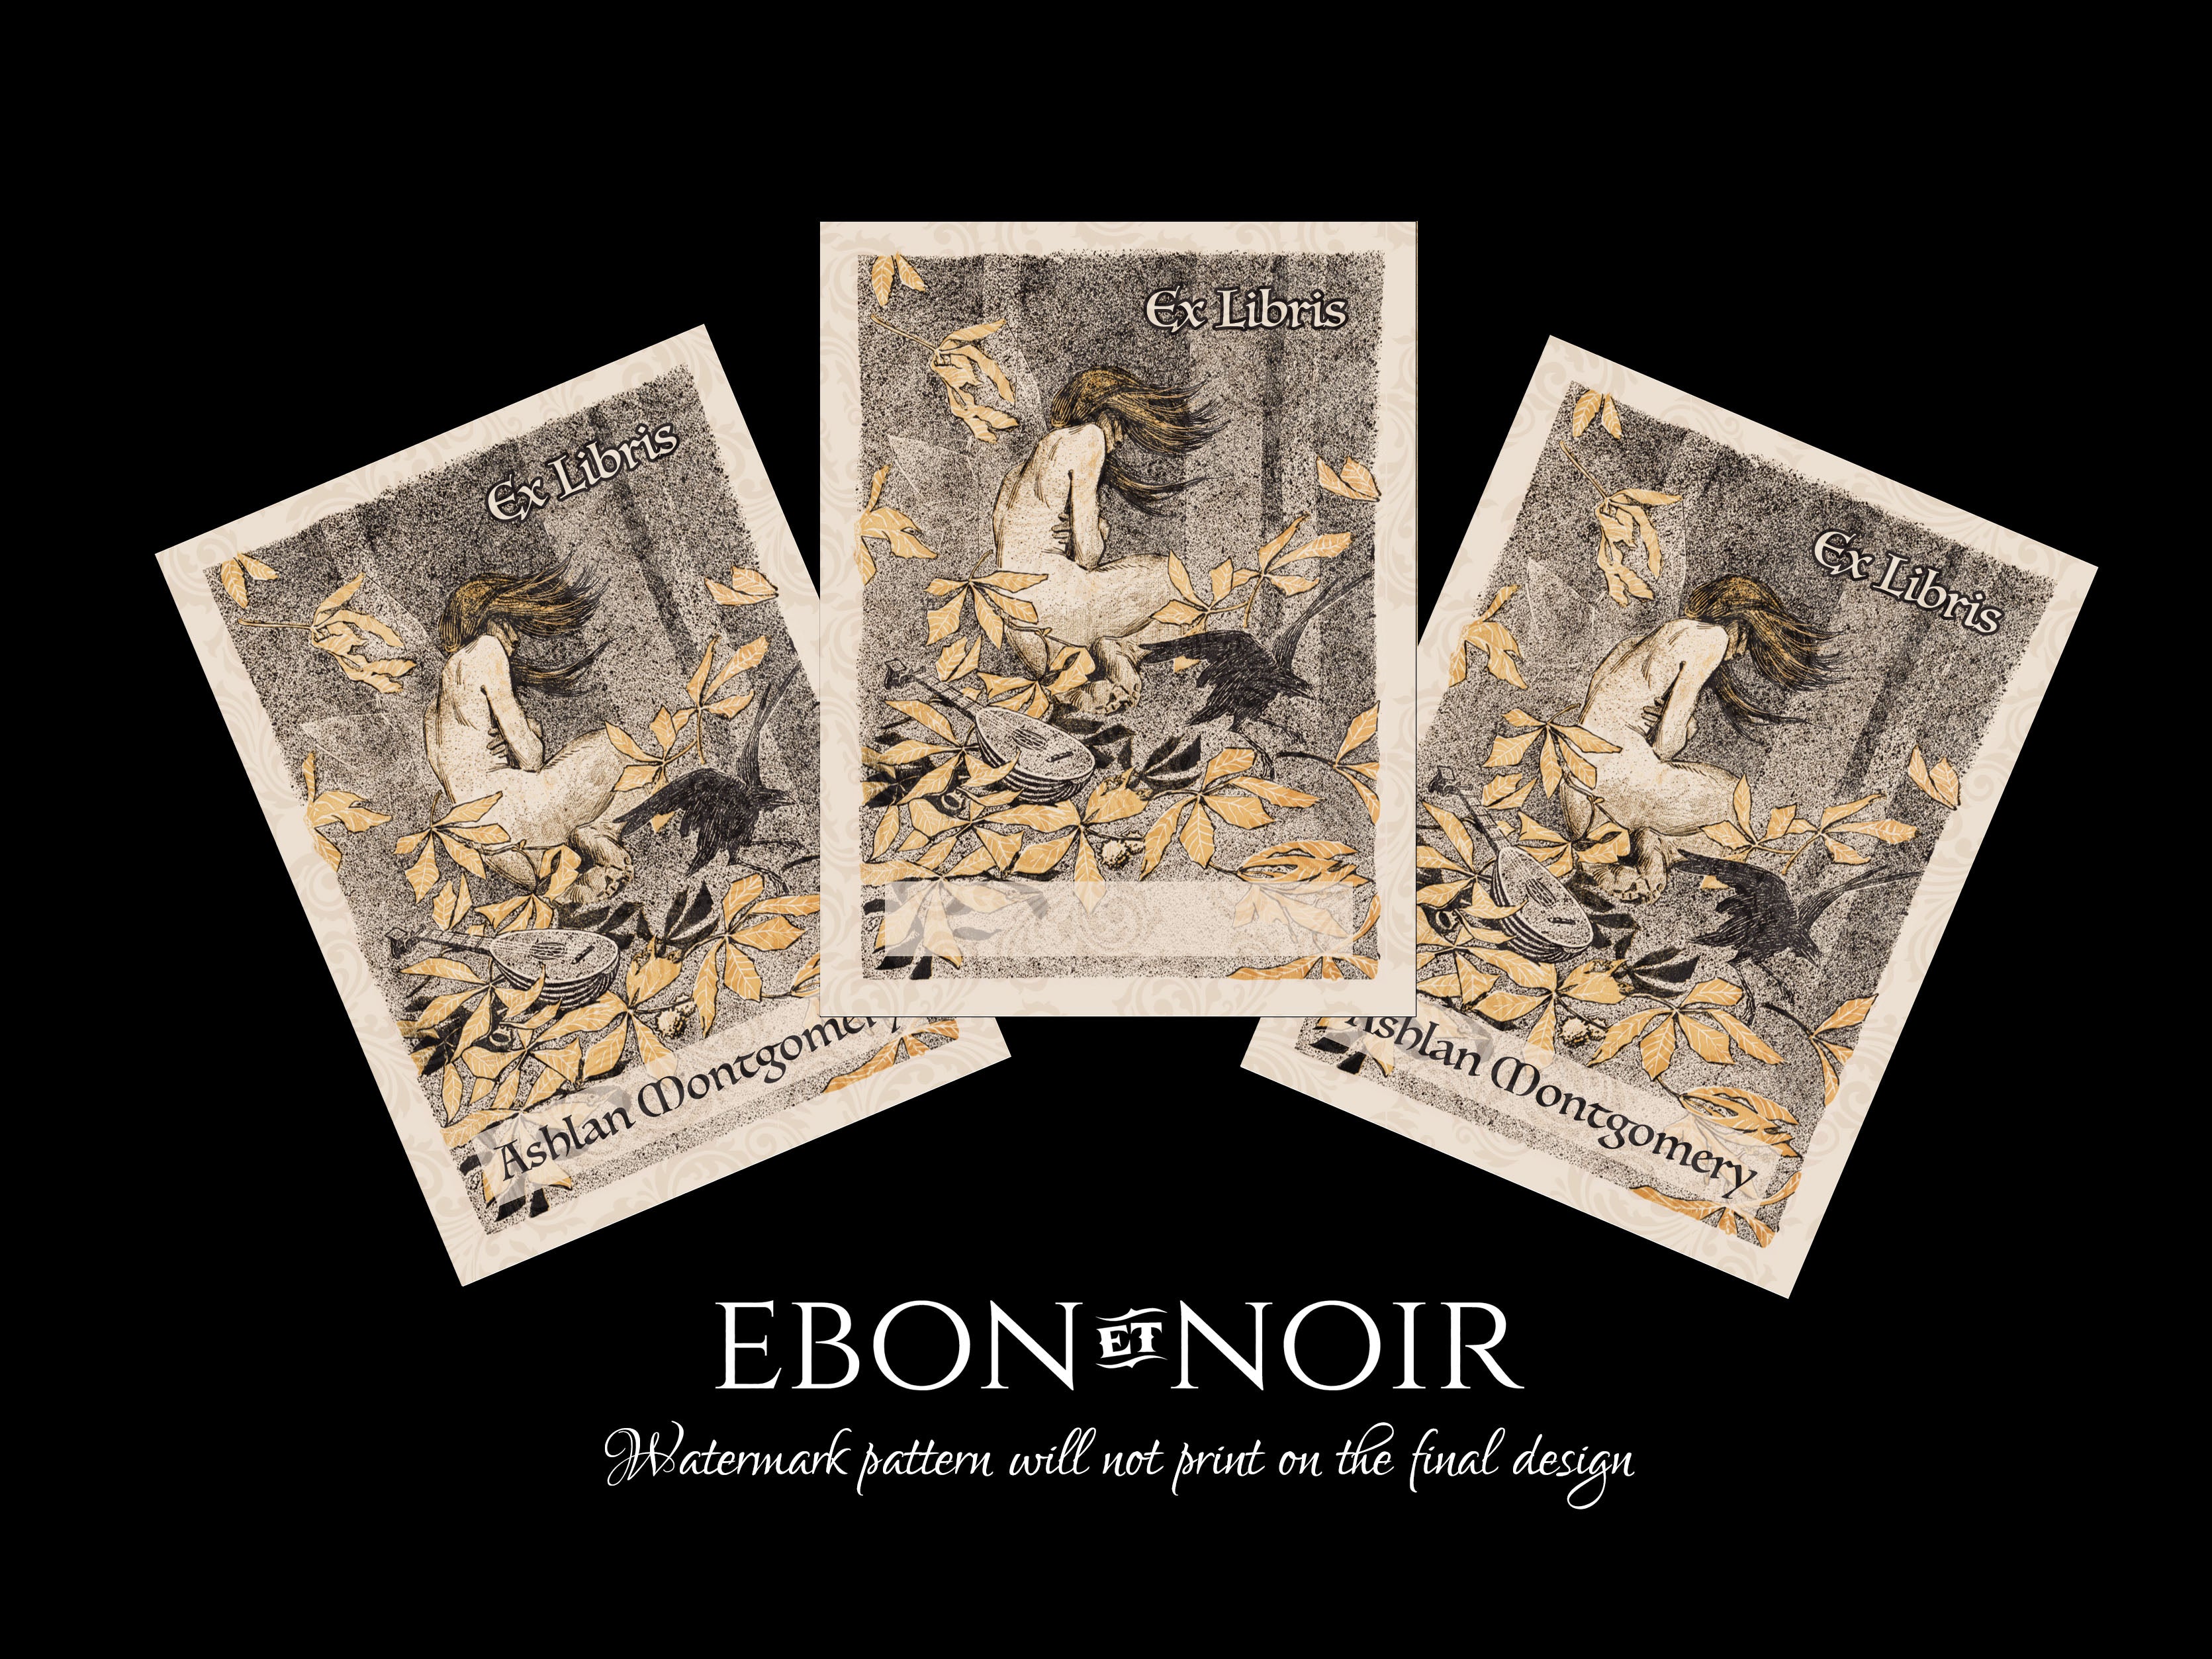 Winter Comes, Personalized Gothic Ex-Libris Bookplates, Crafted on Traditional Gummed Paper, 3in x 4in, Set of 30